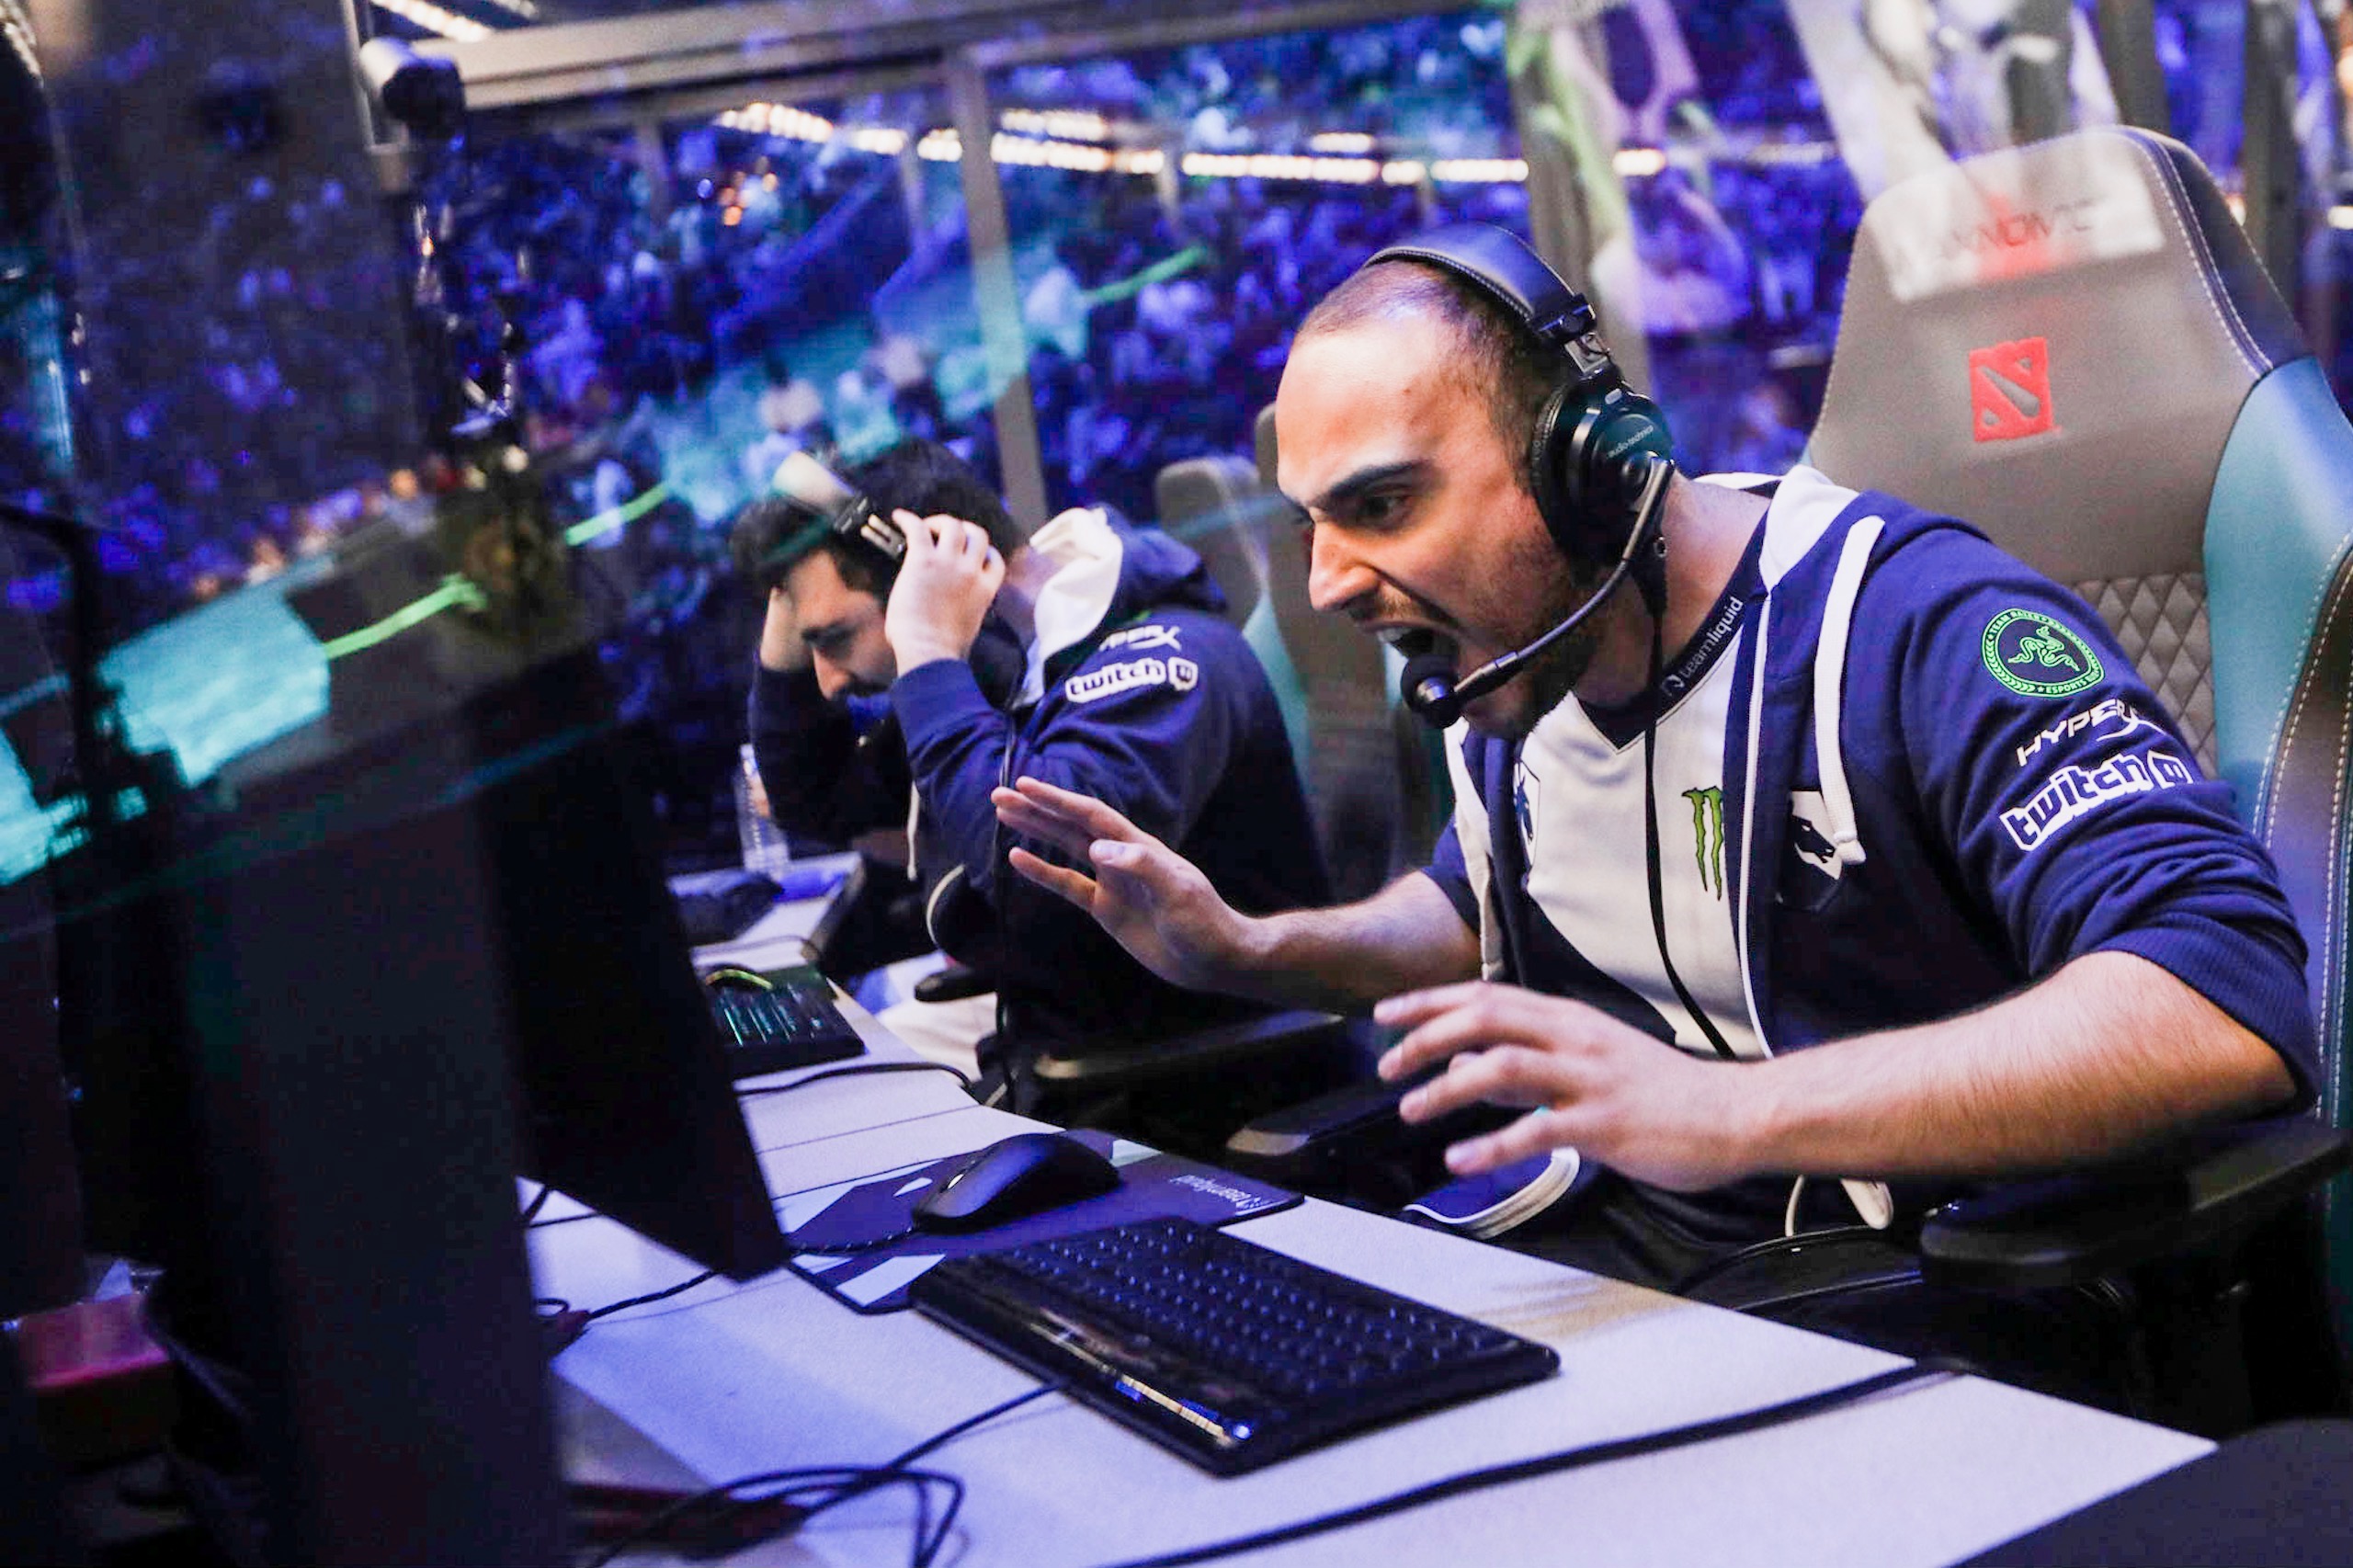 Dota 2 pro KuroKy has played all 116 heroes in competitive matches